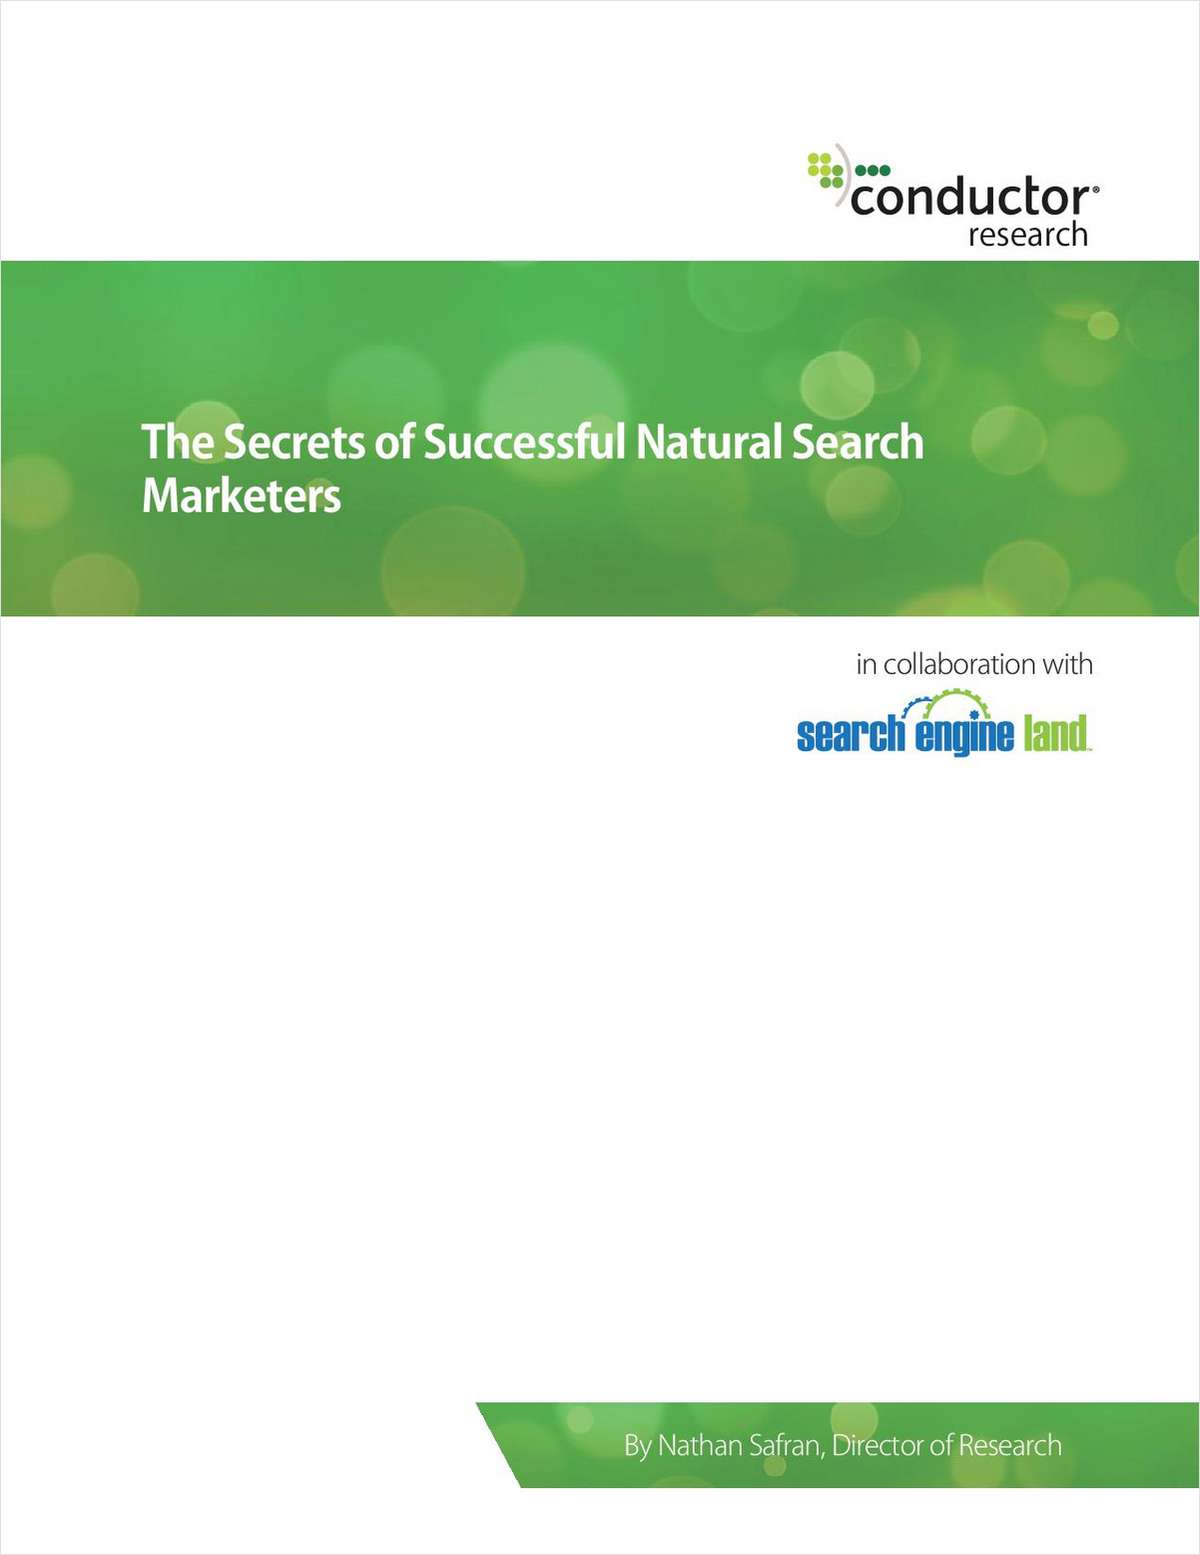 The Secrets of Successful Natural Search Marketers